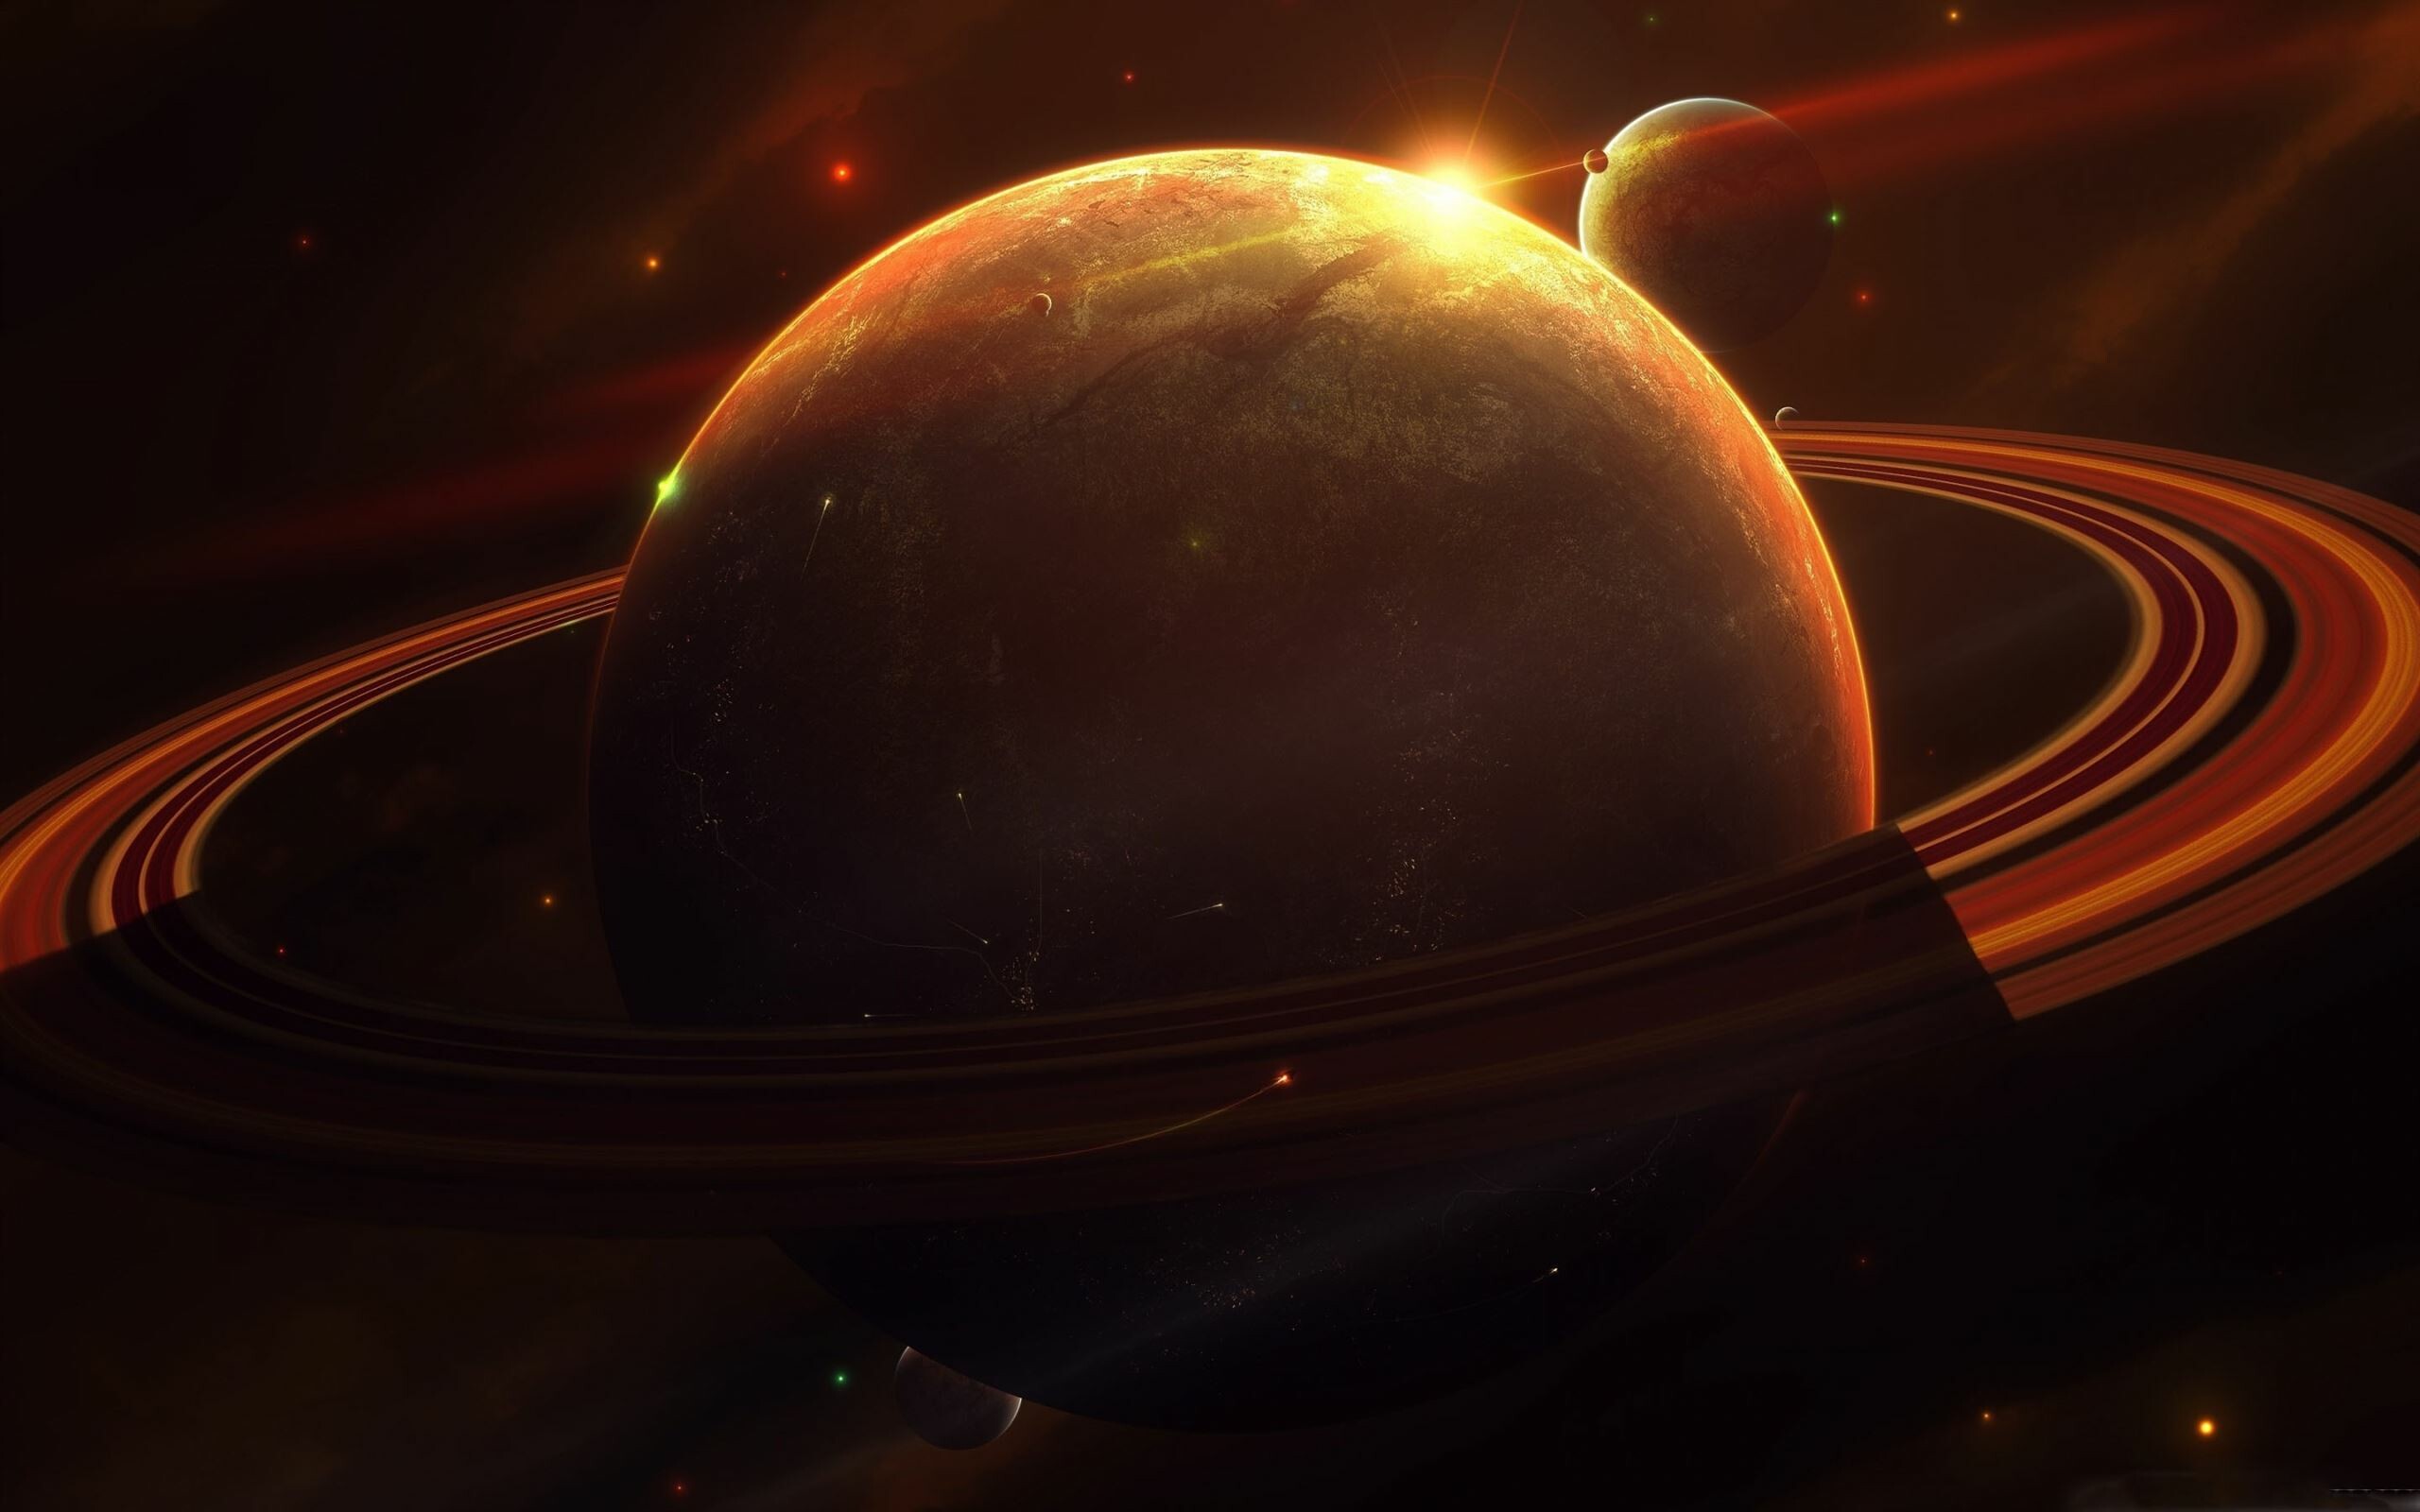 Saturn: Titan, the planet's largest moon and the second largest in the Solar System. 2560x1600 HD Wallpaper.